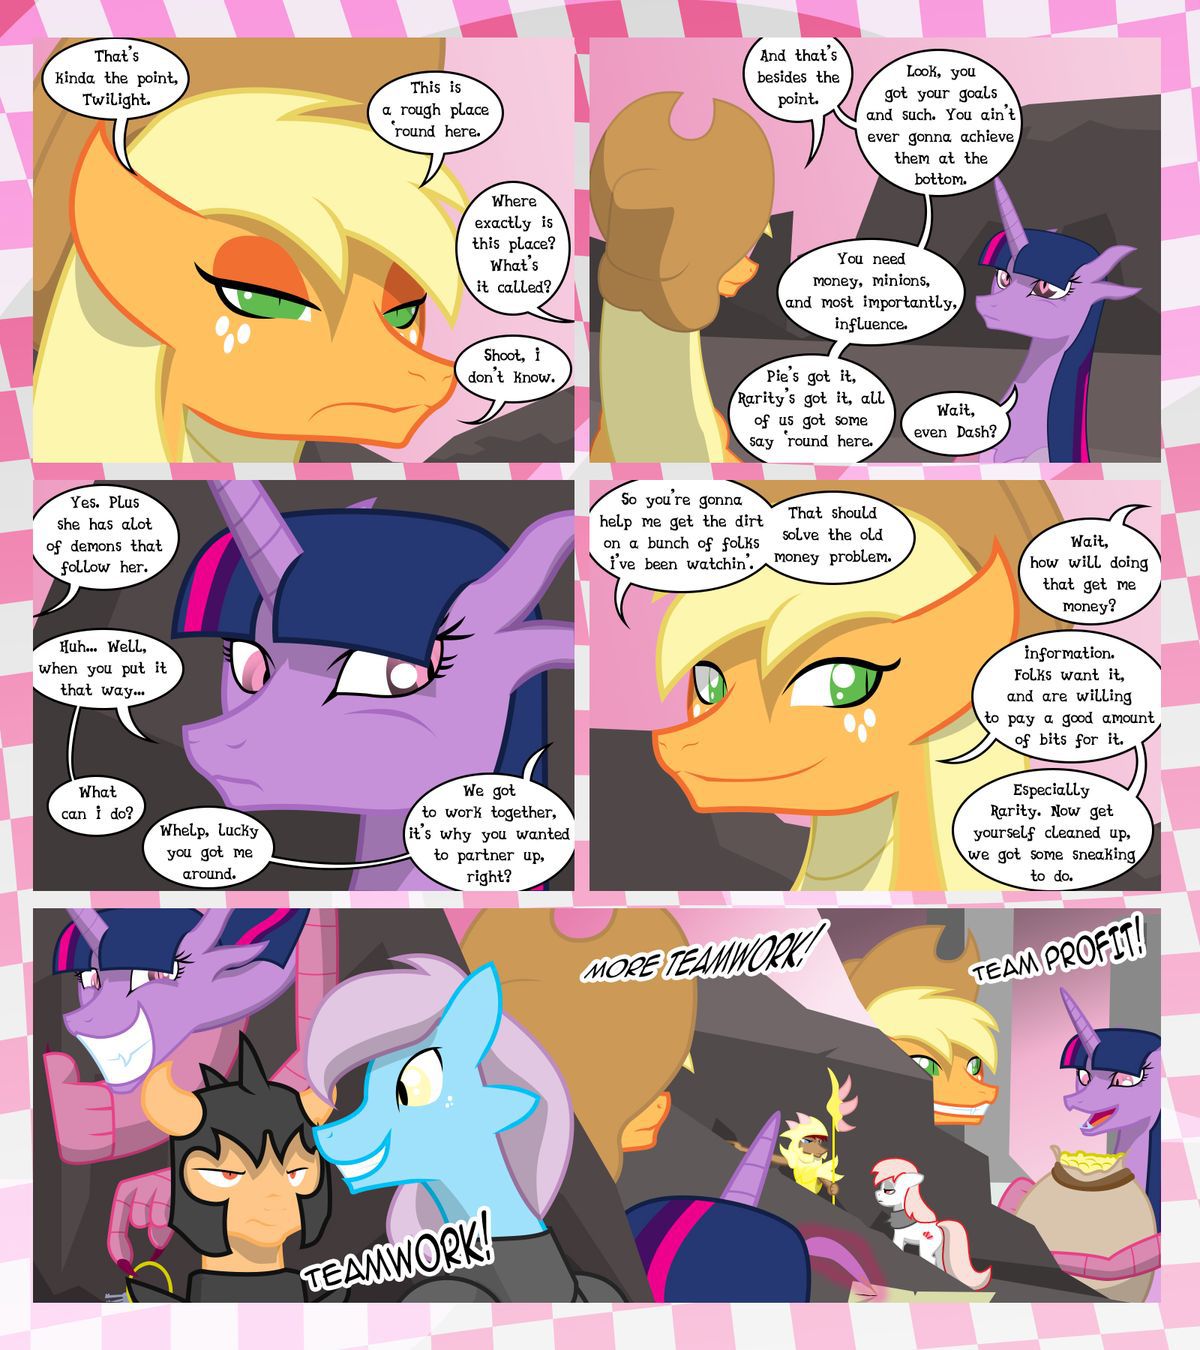 [GatesMcCloud] Cutie Mark Crusaders 10k: Chapter 3 - The Lost (My Little Pony: Friendship is Magic) [English] [Ongoing] 62